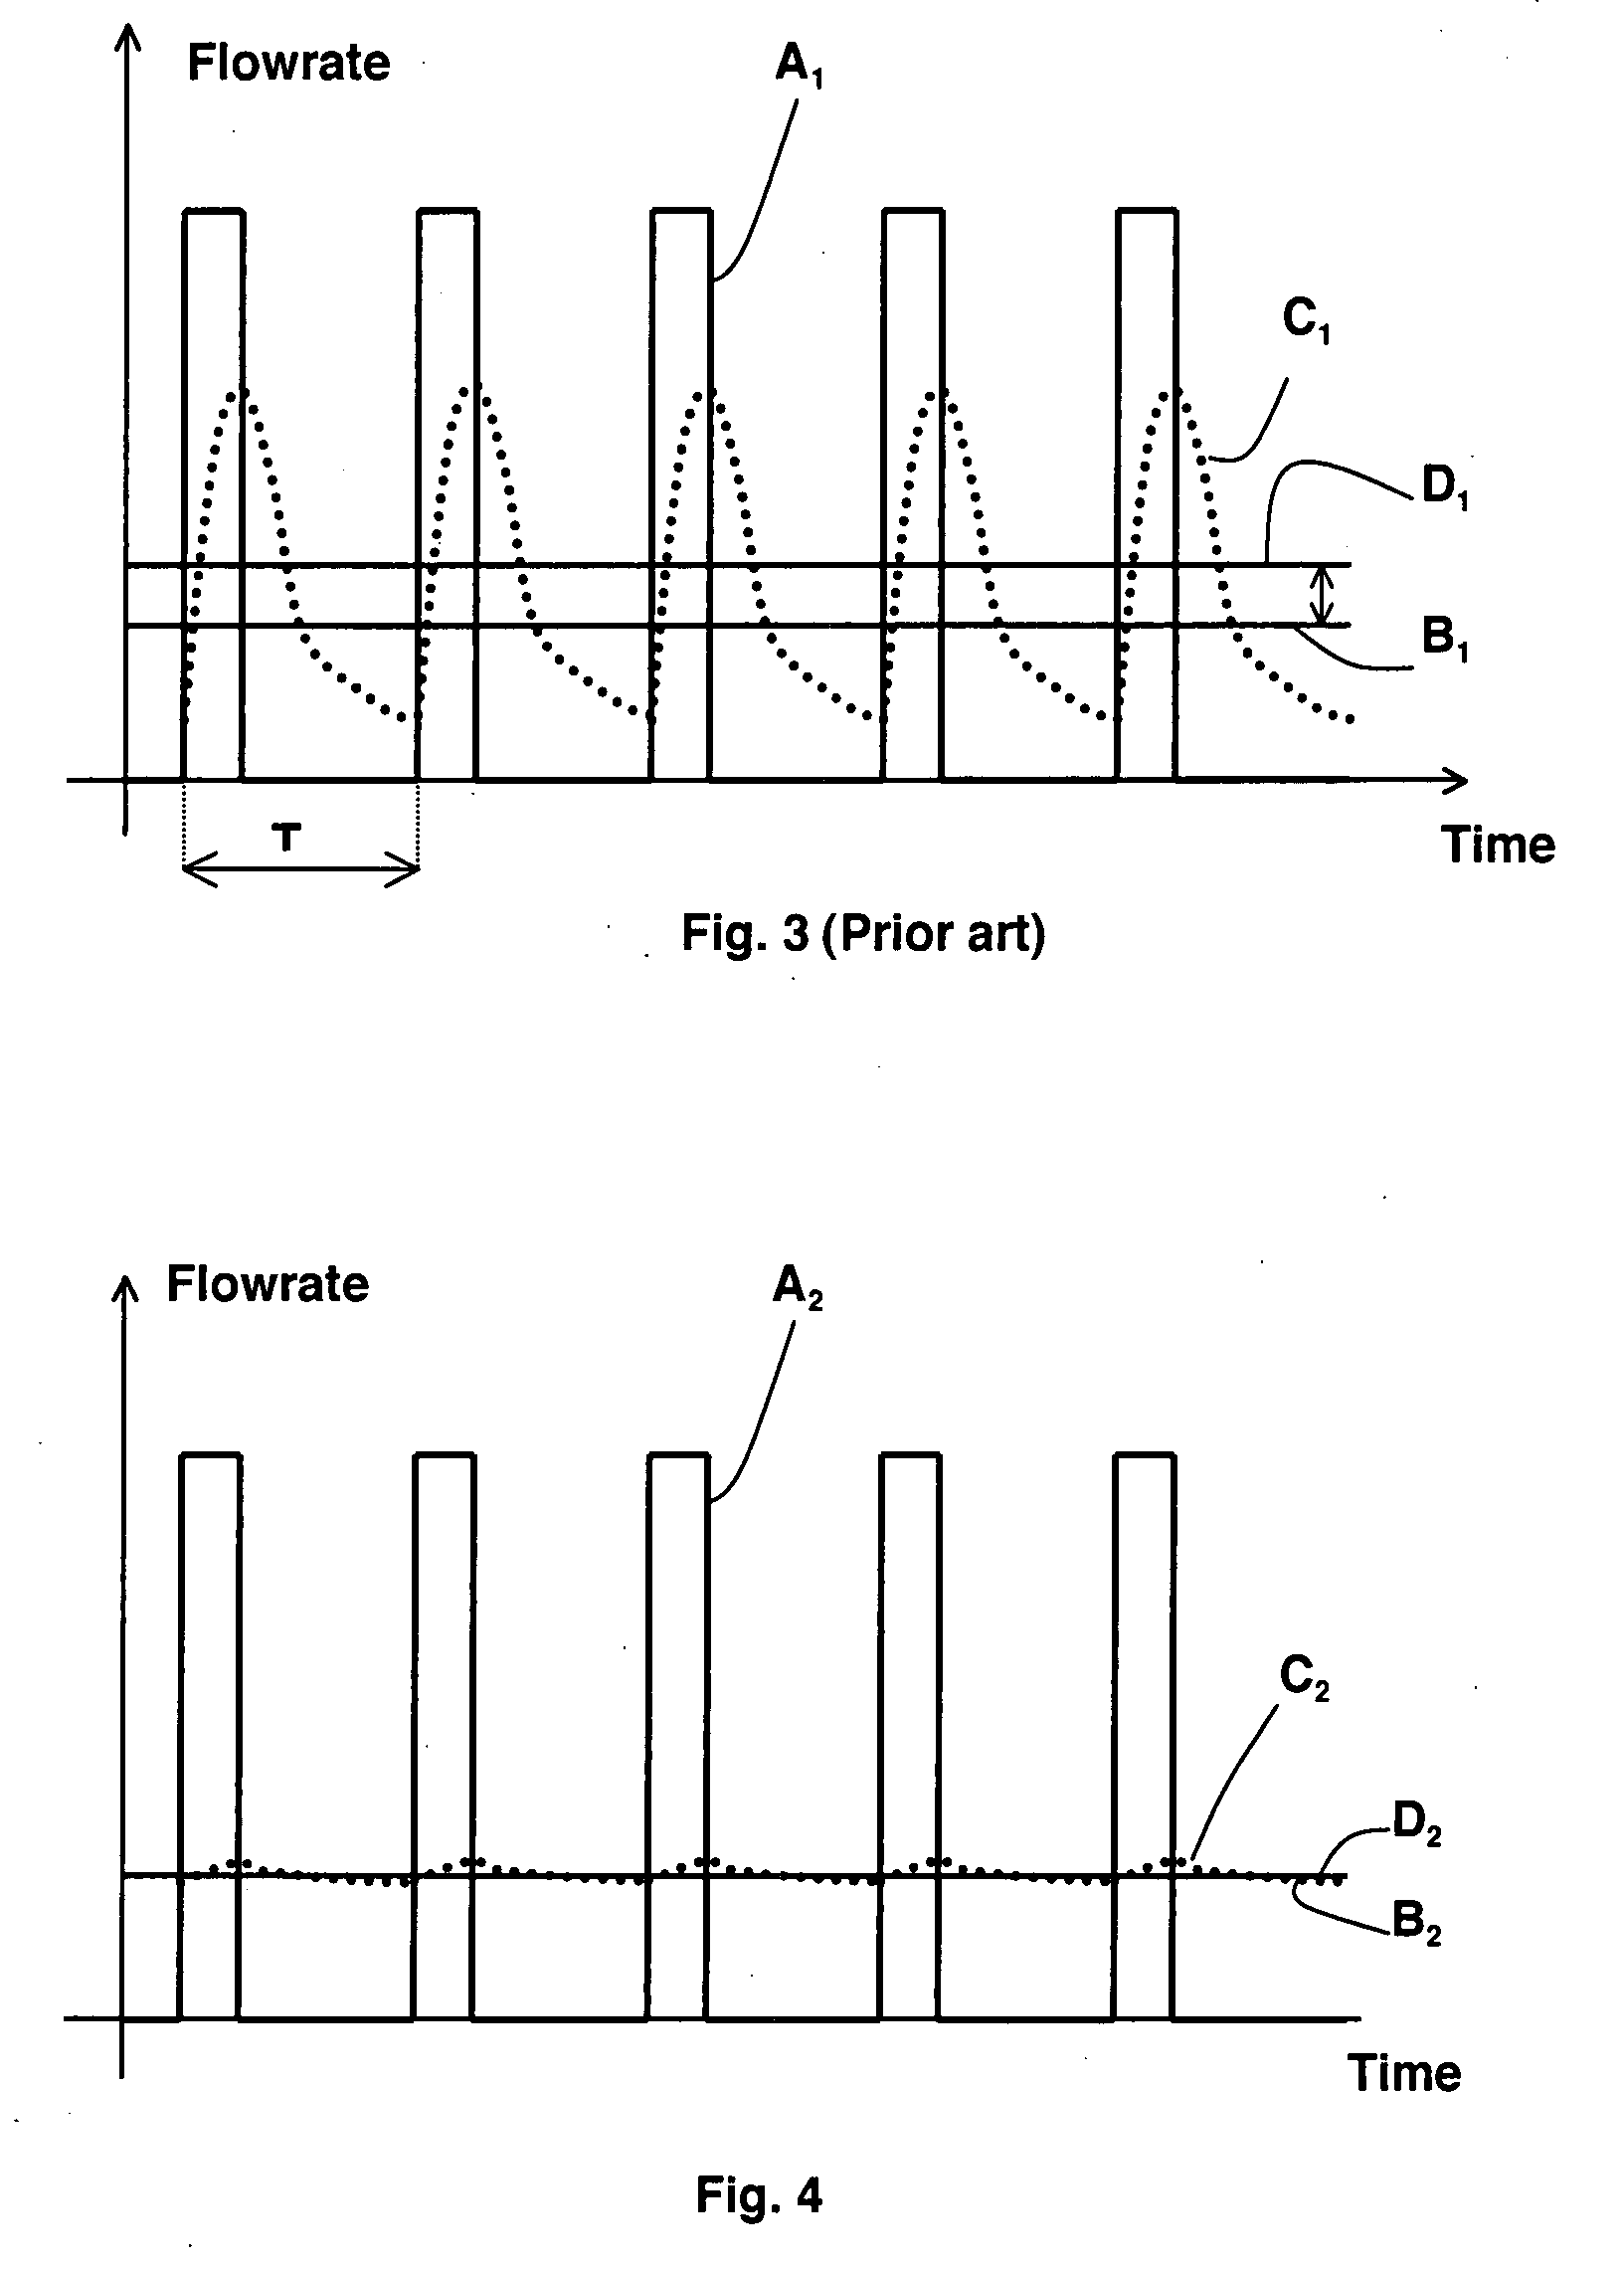 Device for injecting liquid precursors into a chamber in pulsed mode with measurement and control of the flowrate